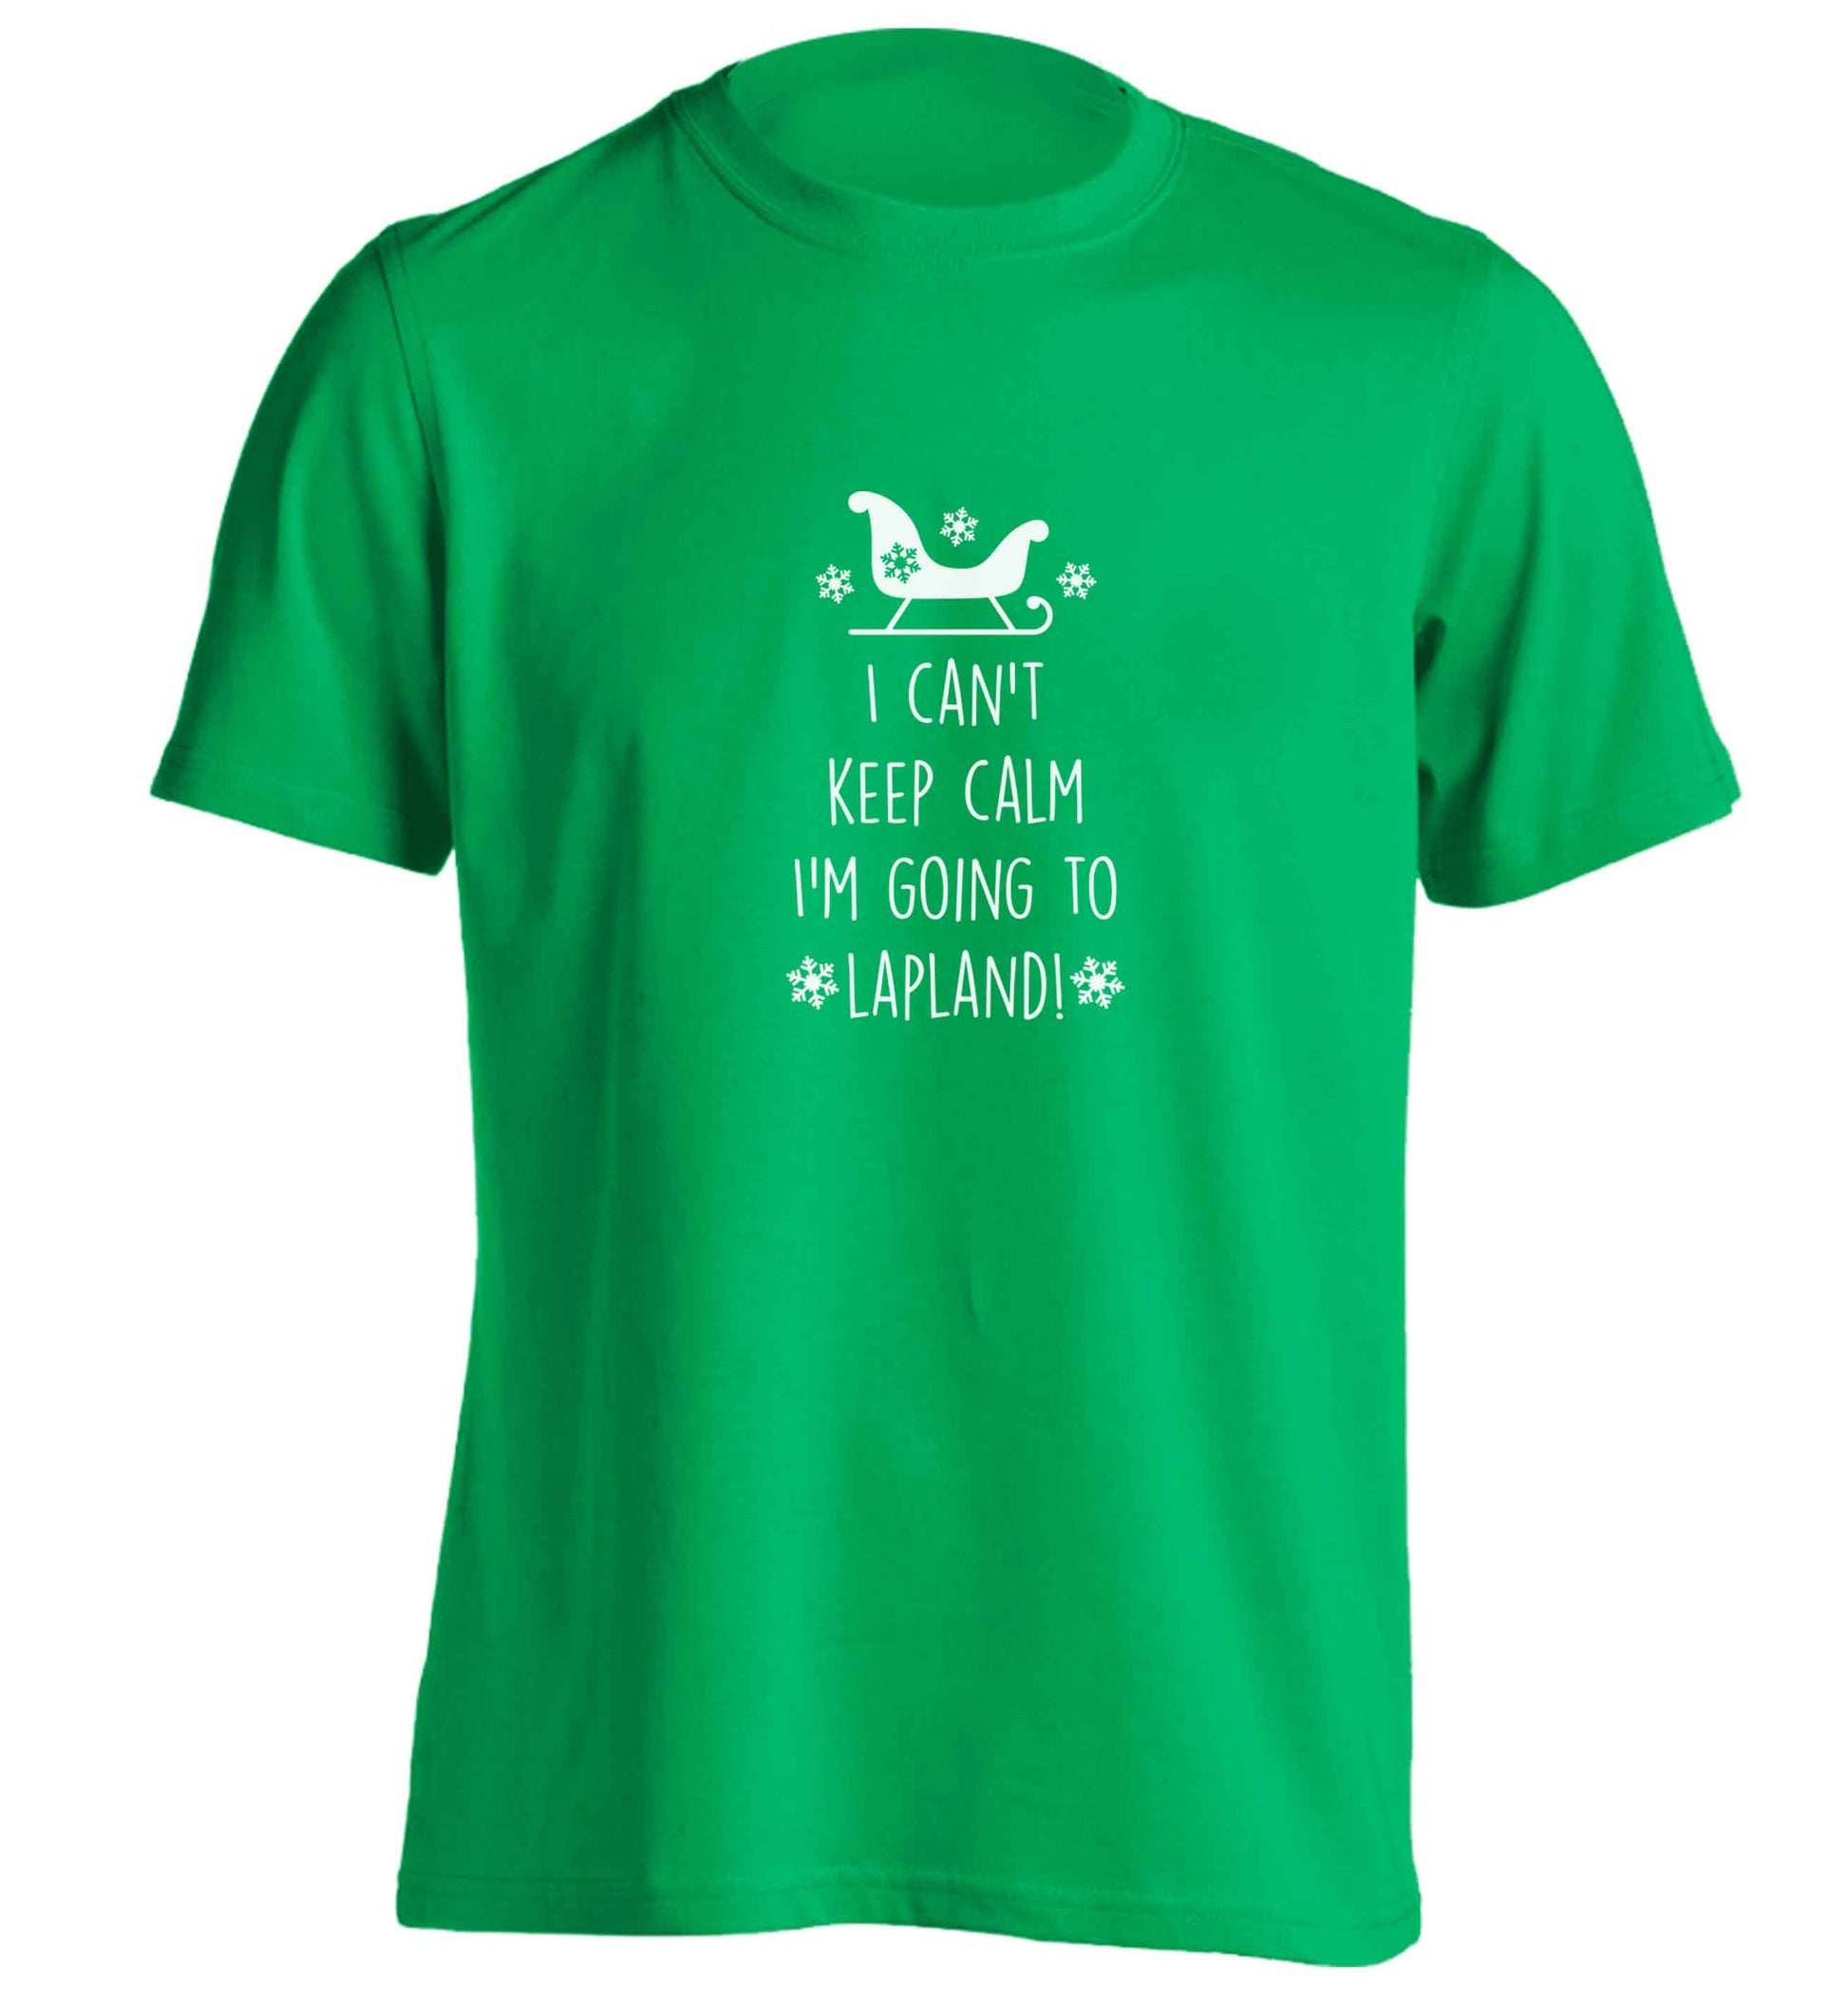 I can't keep calm I'm going to Lapland adults unisex green Tshirt 2XL